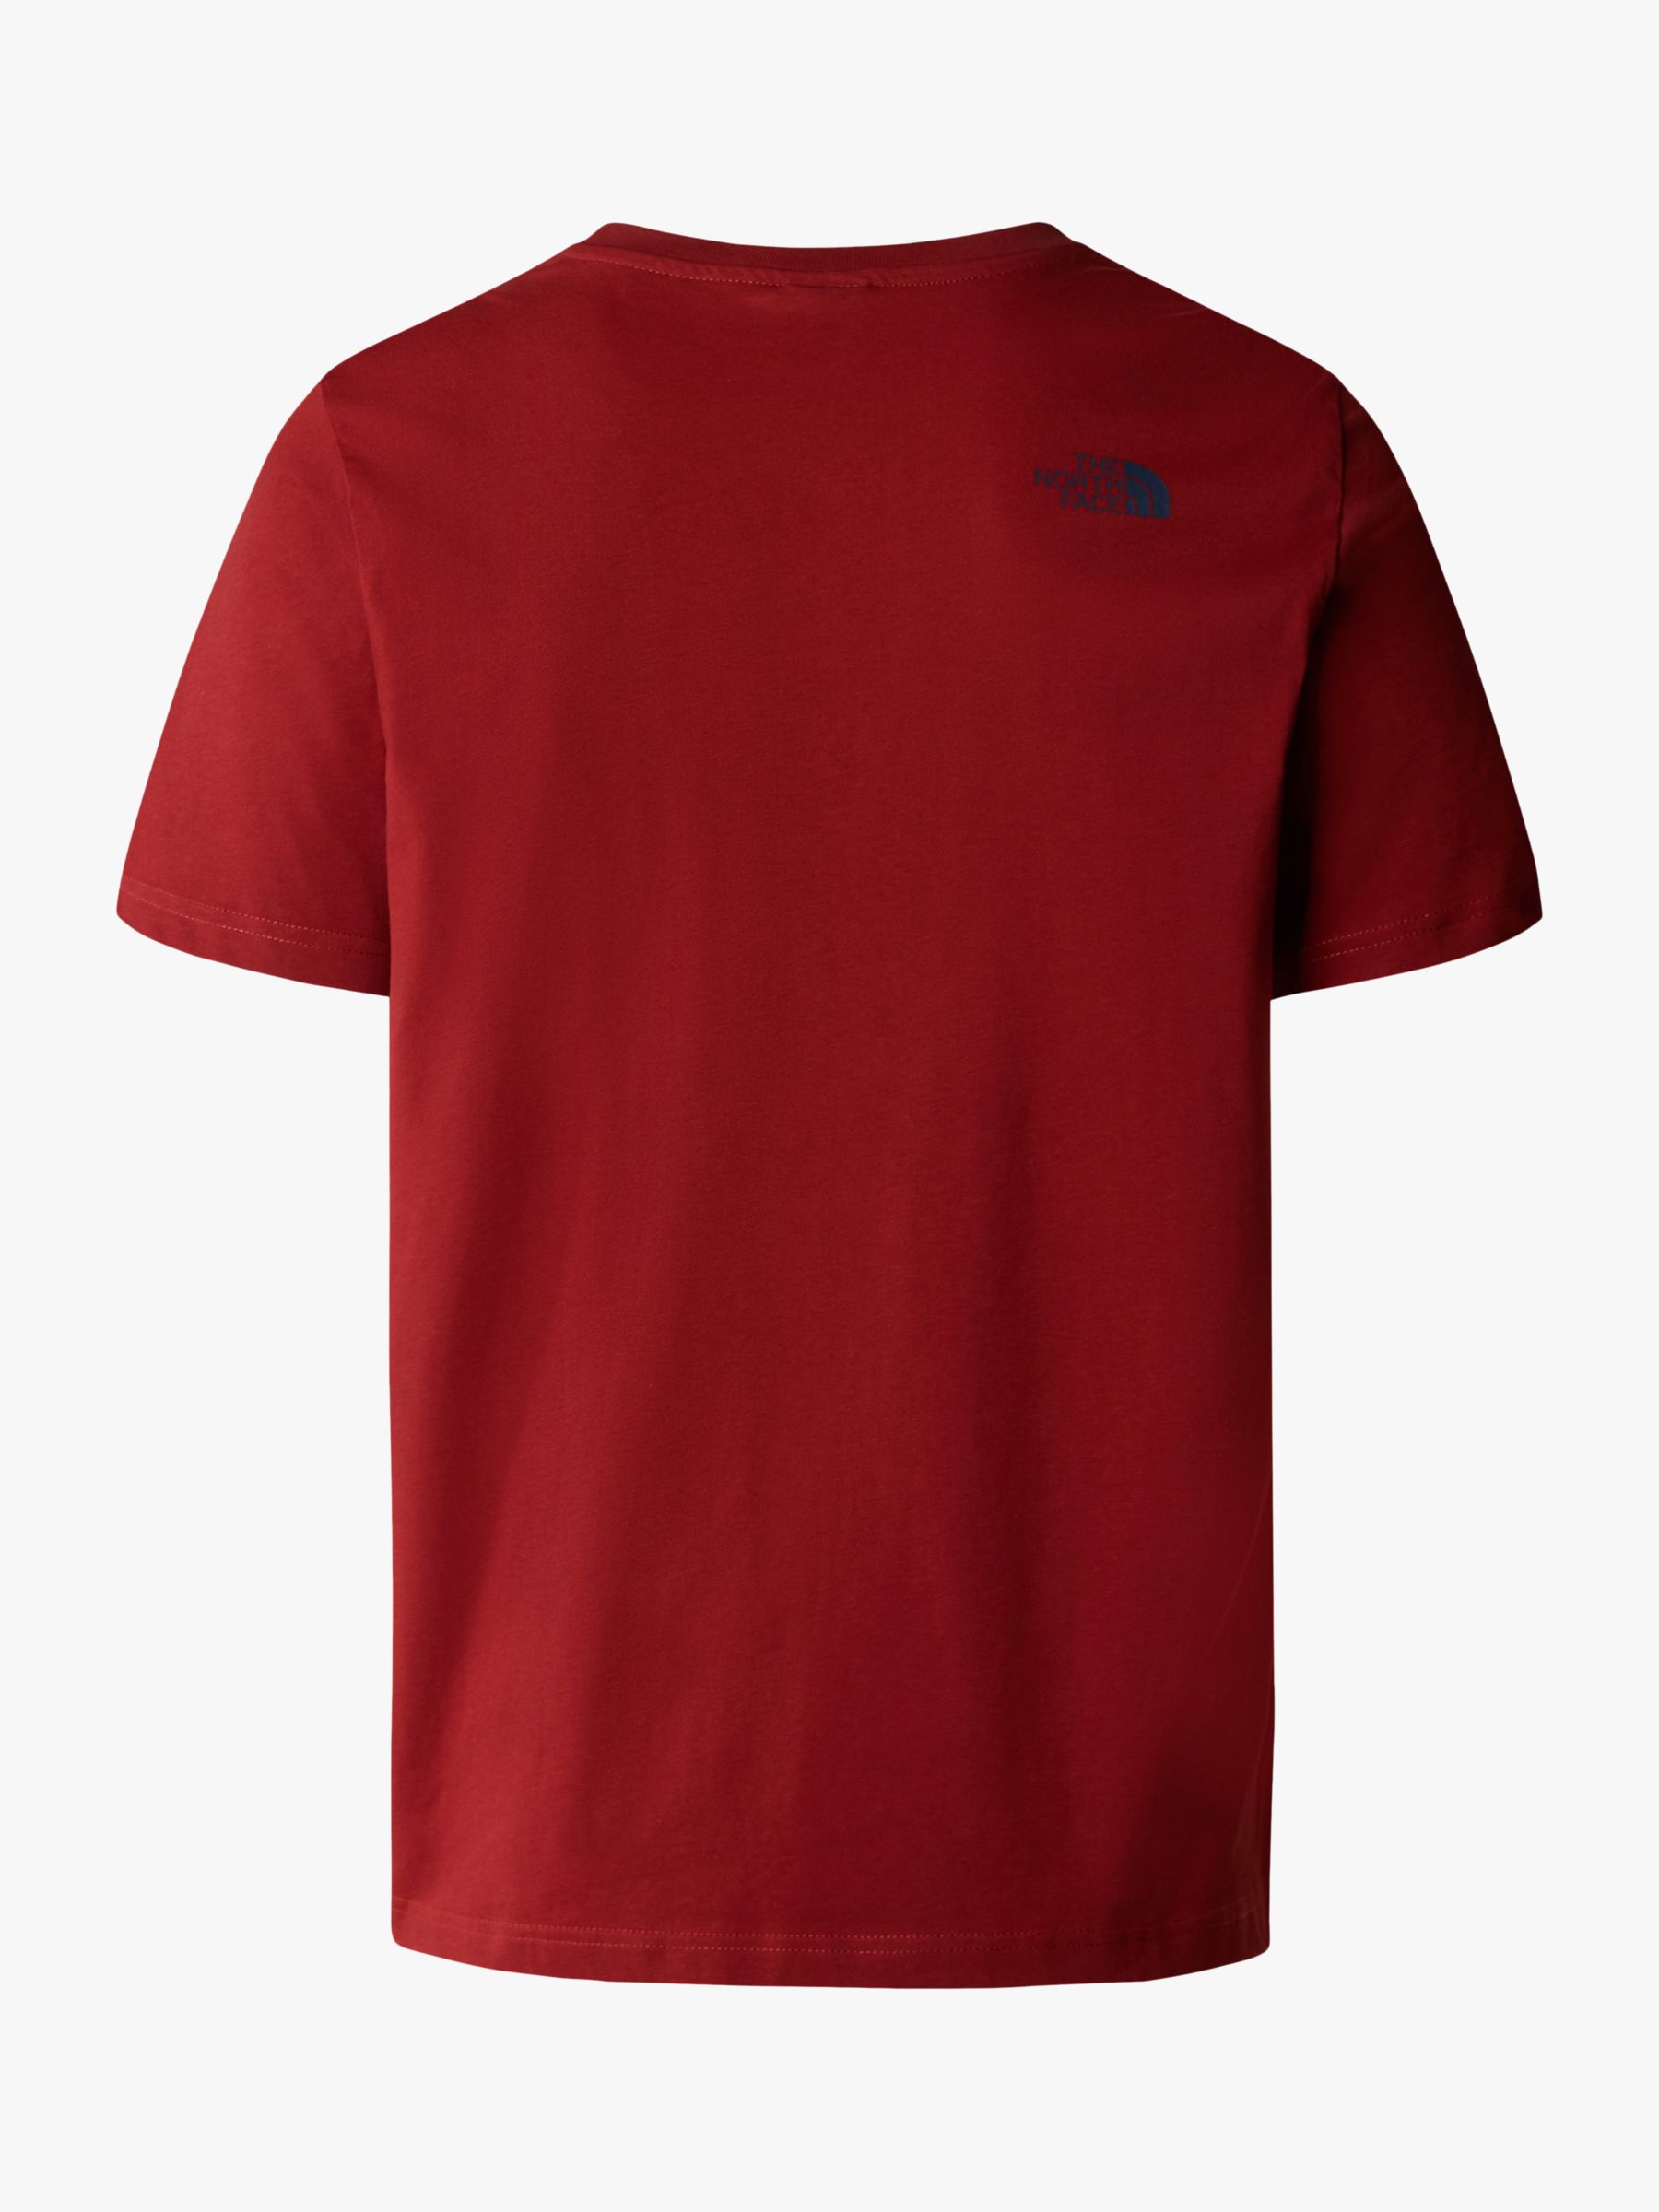 The North Face Short Sleeve Rust T-Shirt, Red, S